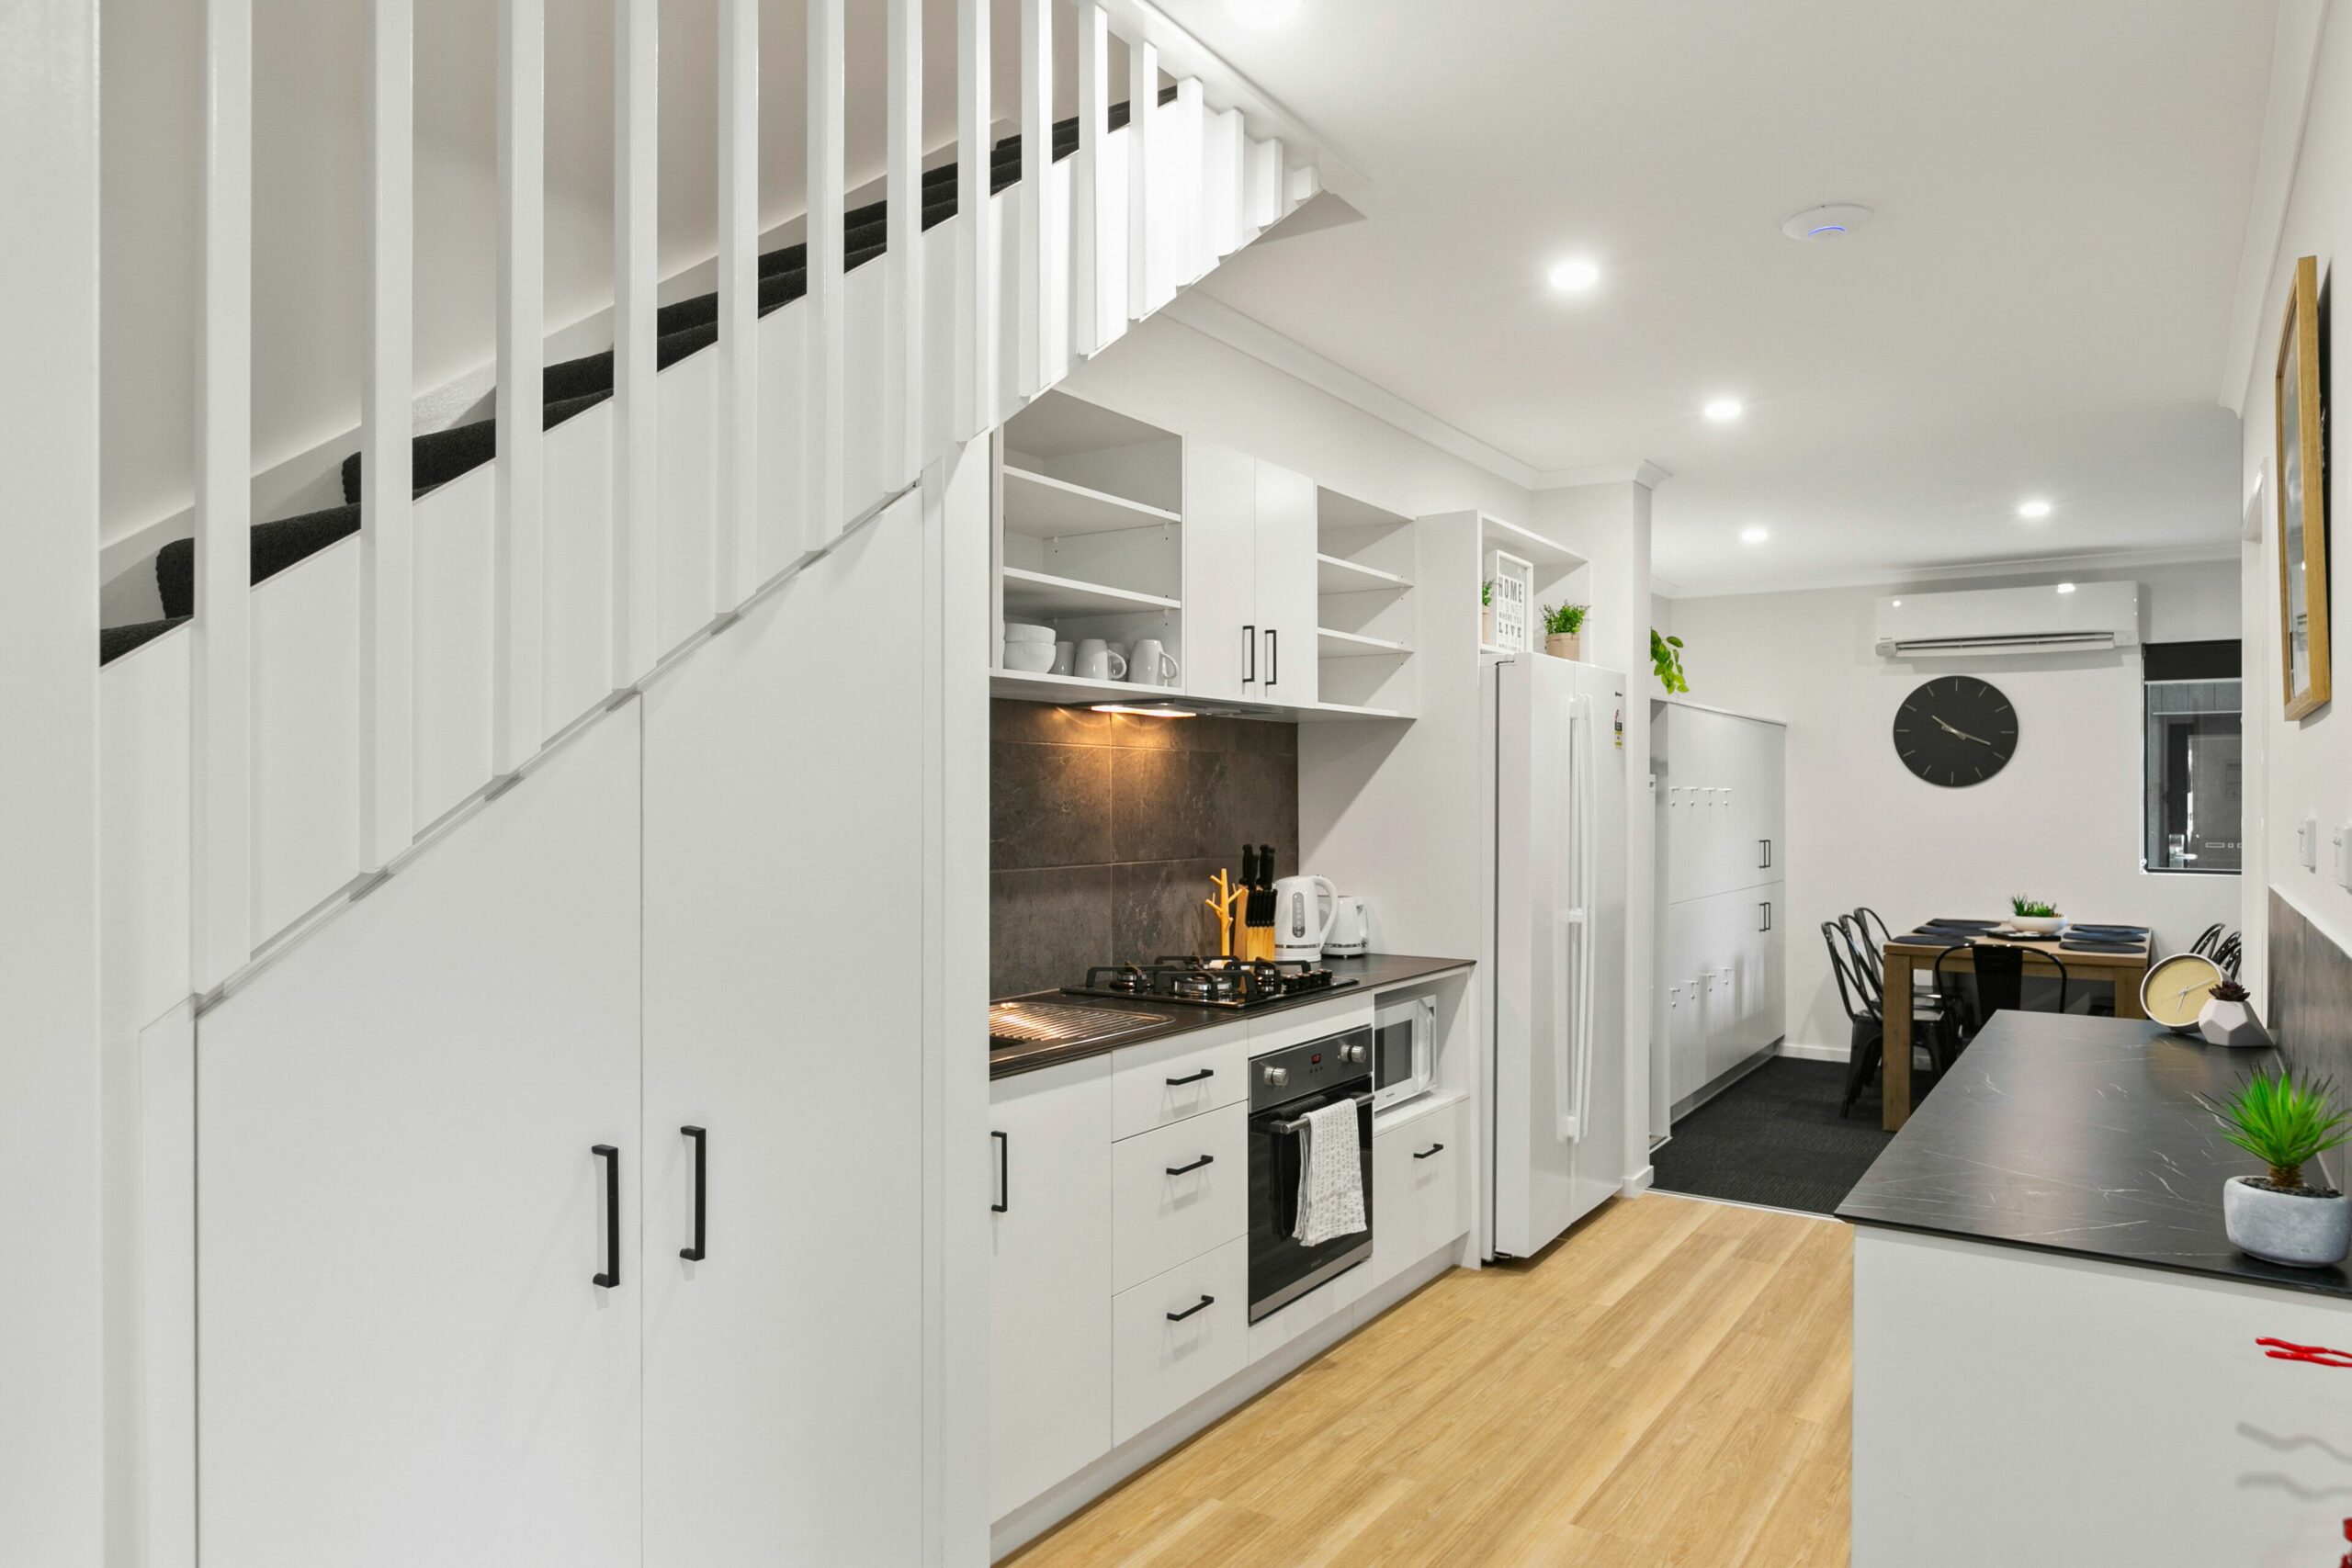 MiHaven Living – Martyn St Apartments